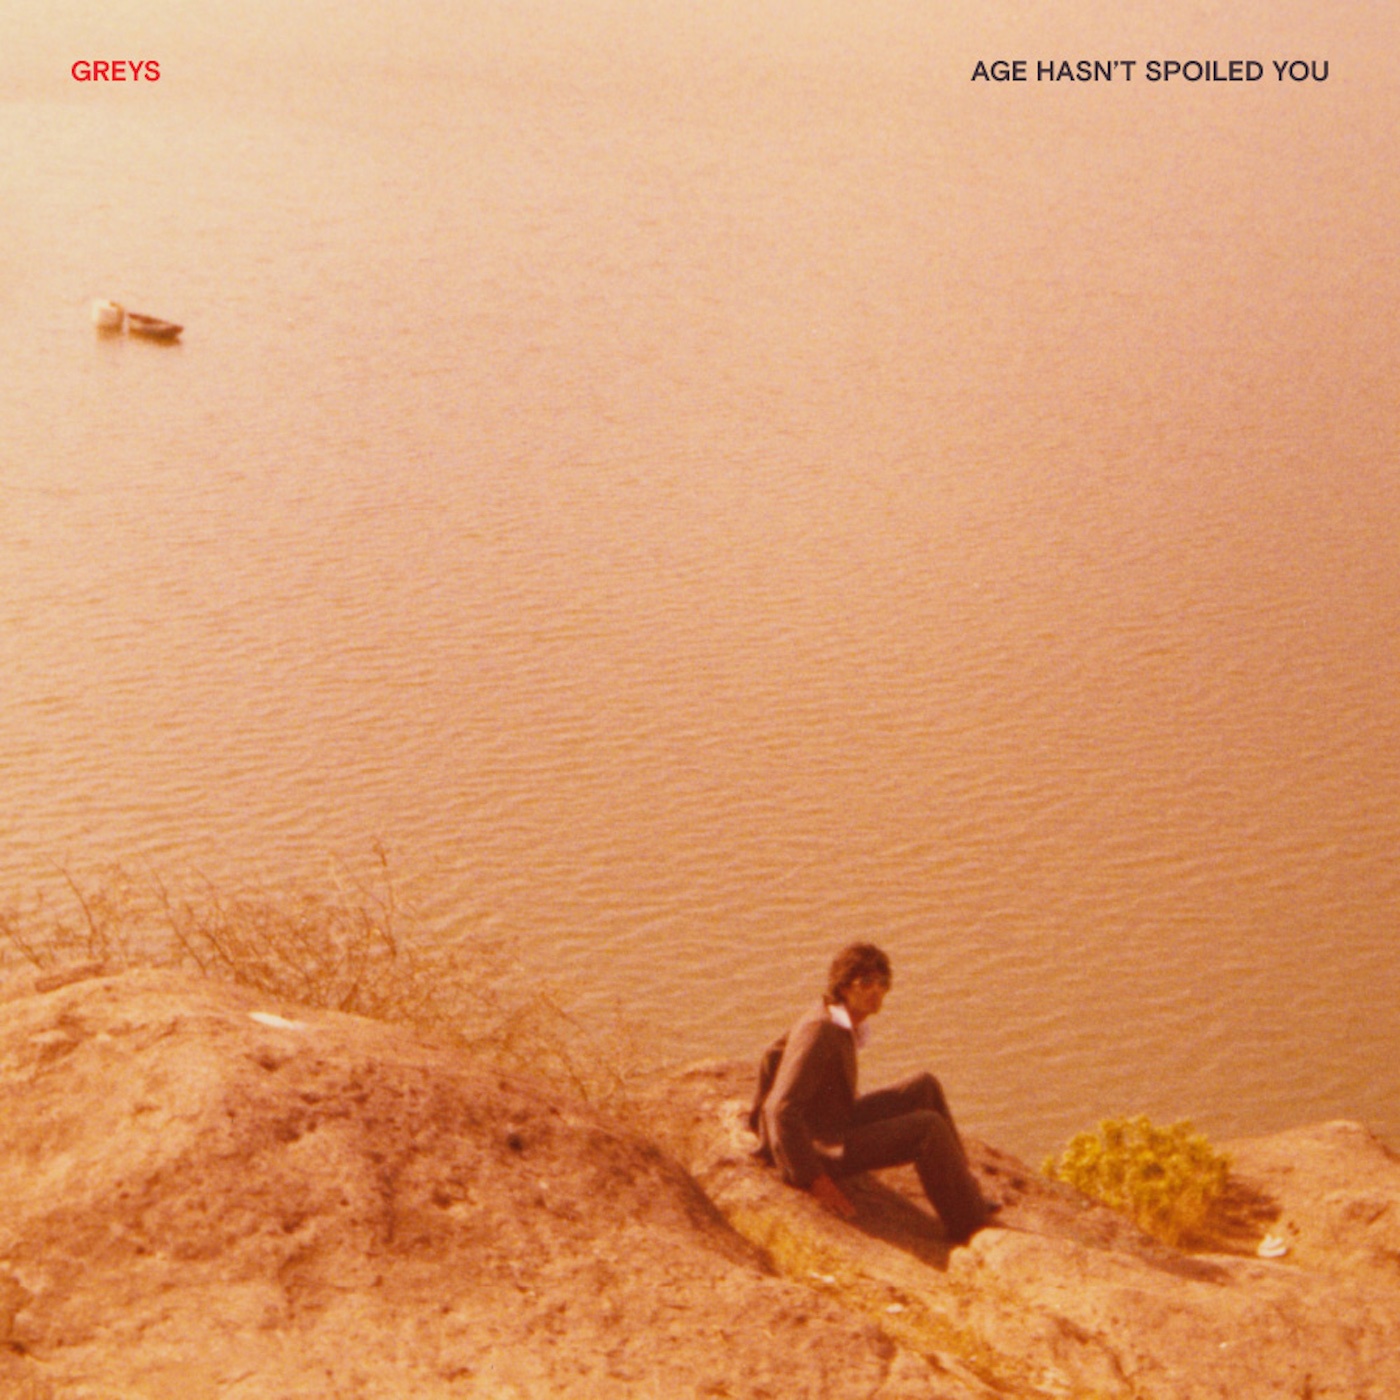 Greys - Age Hasn't Spoiled You vinyl cover